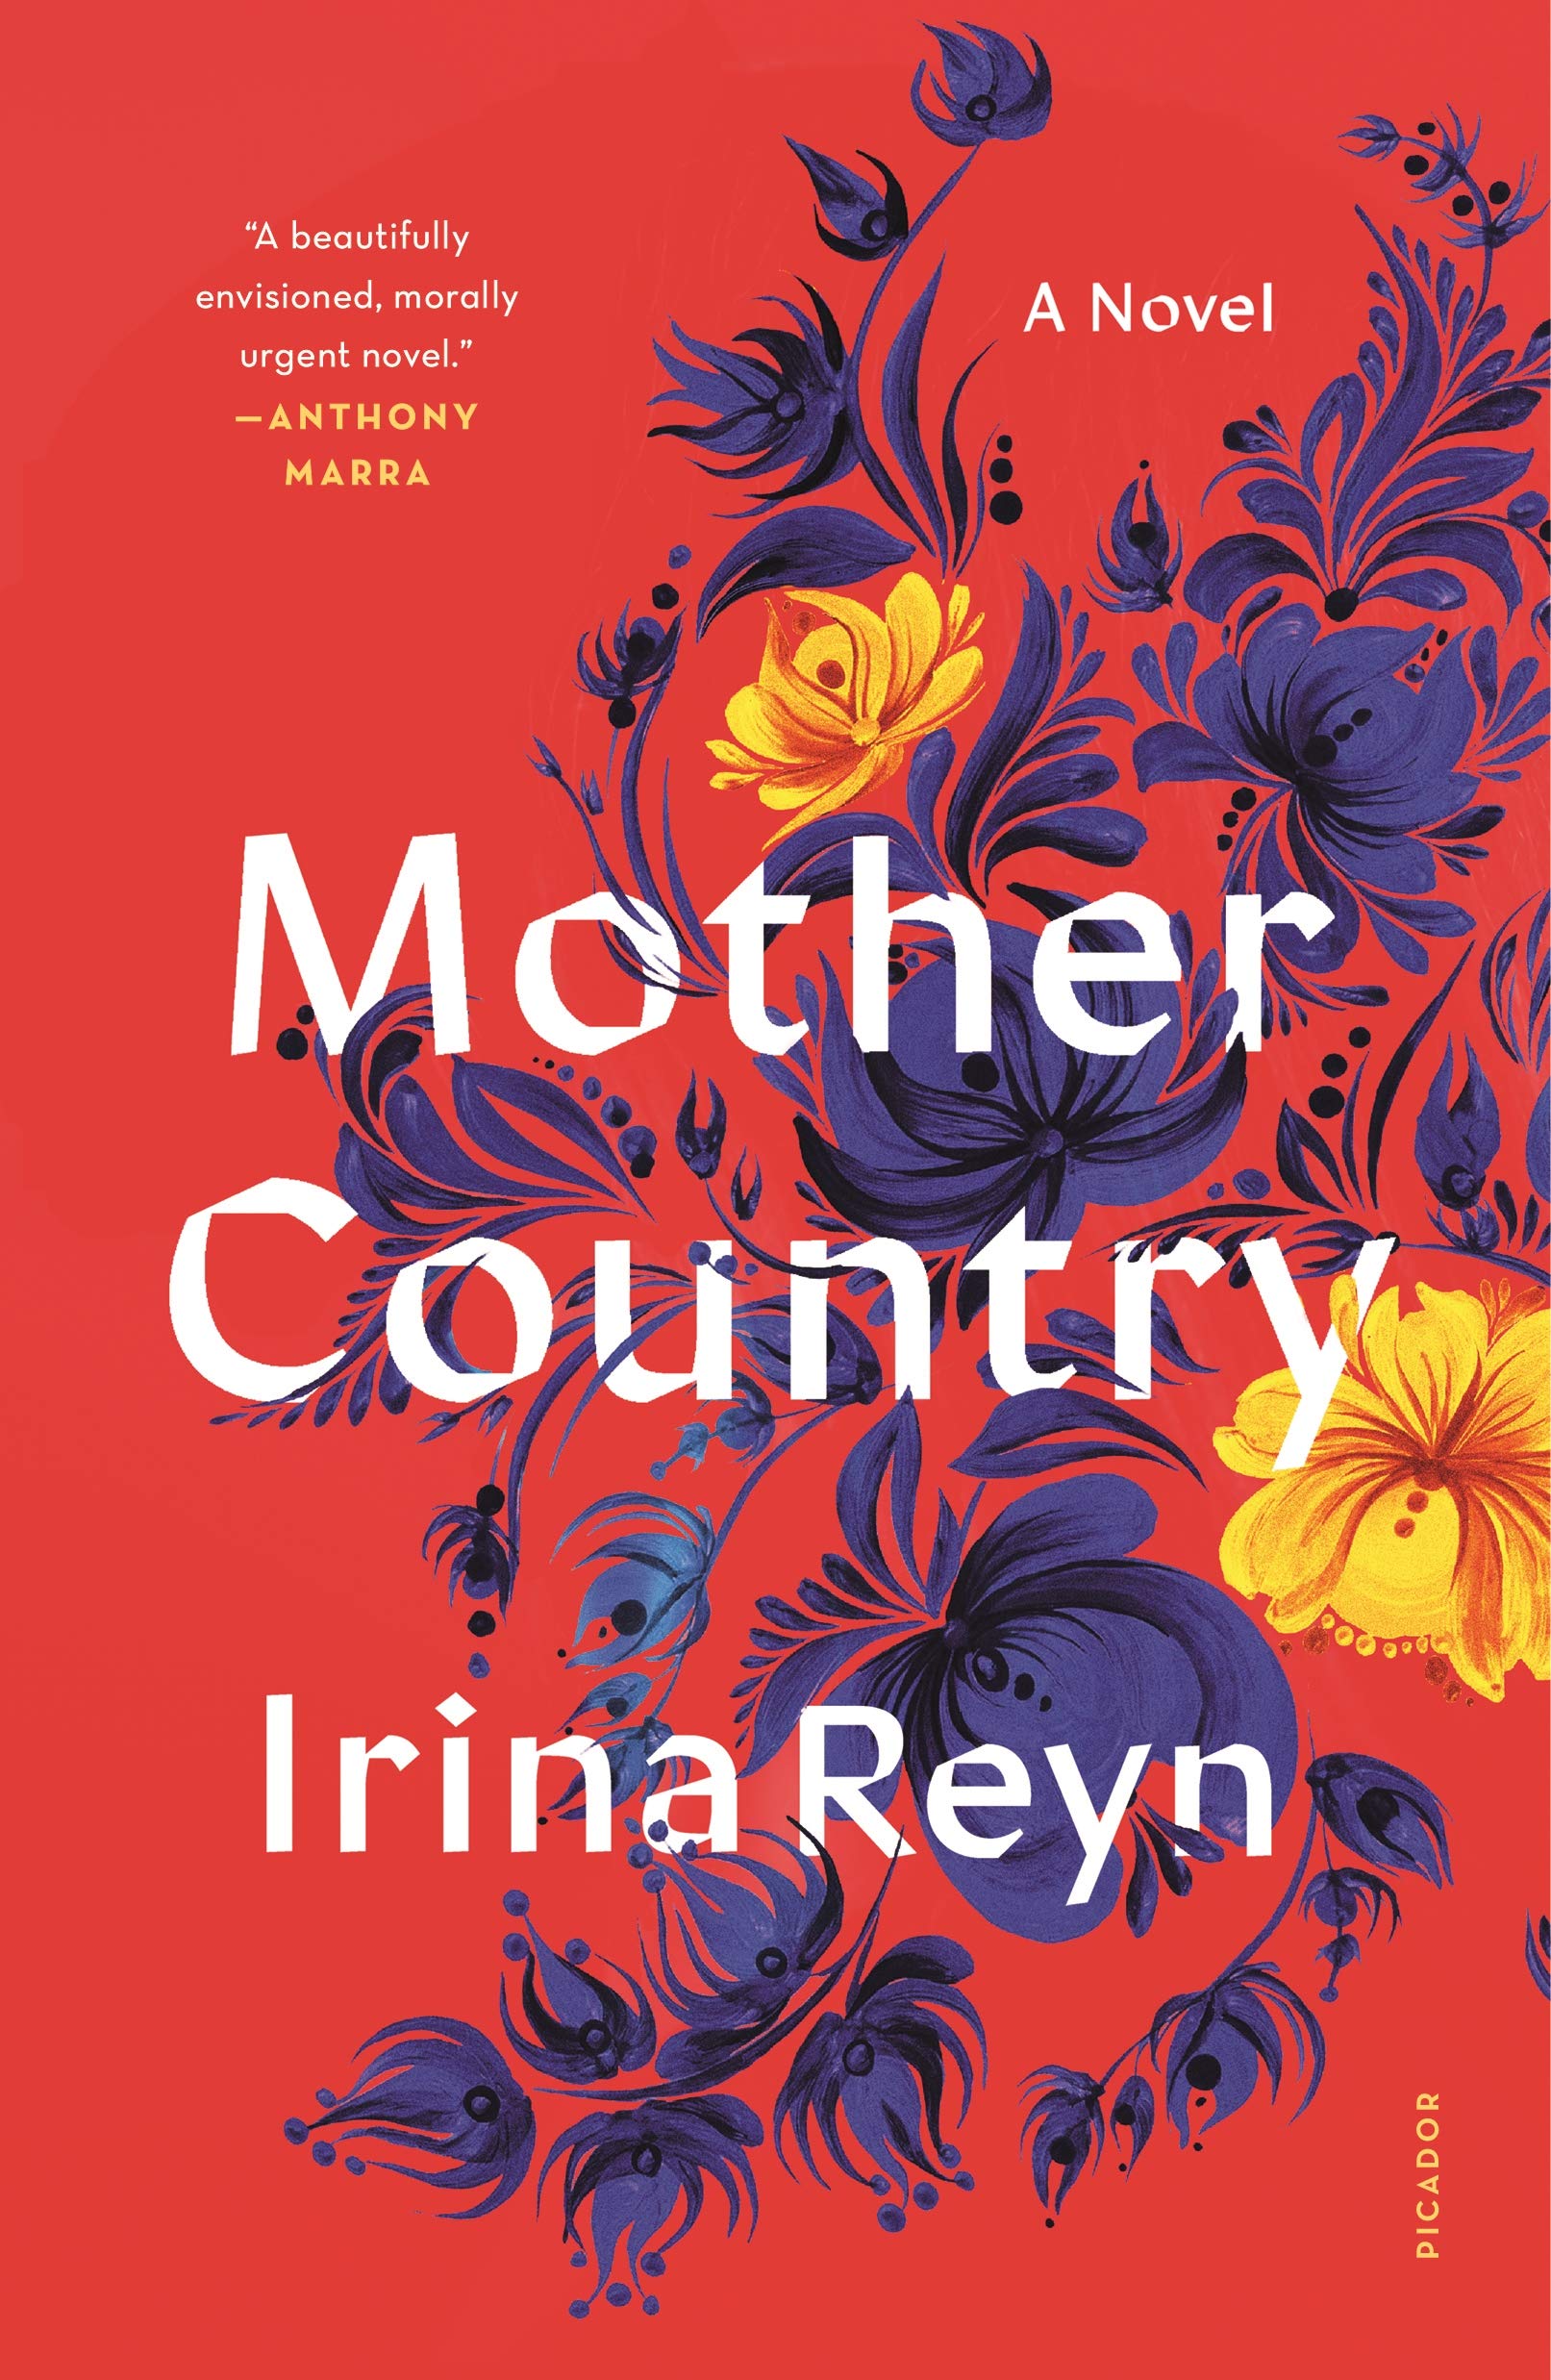 Mother Country paperback cover